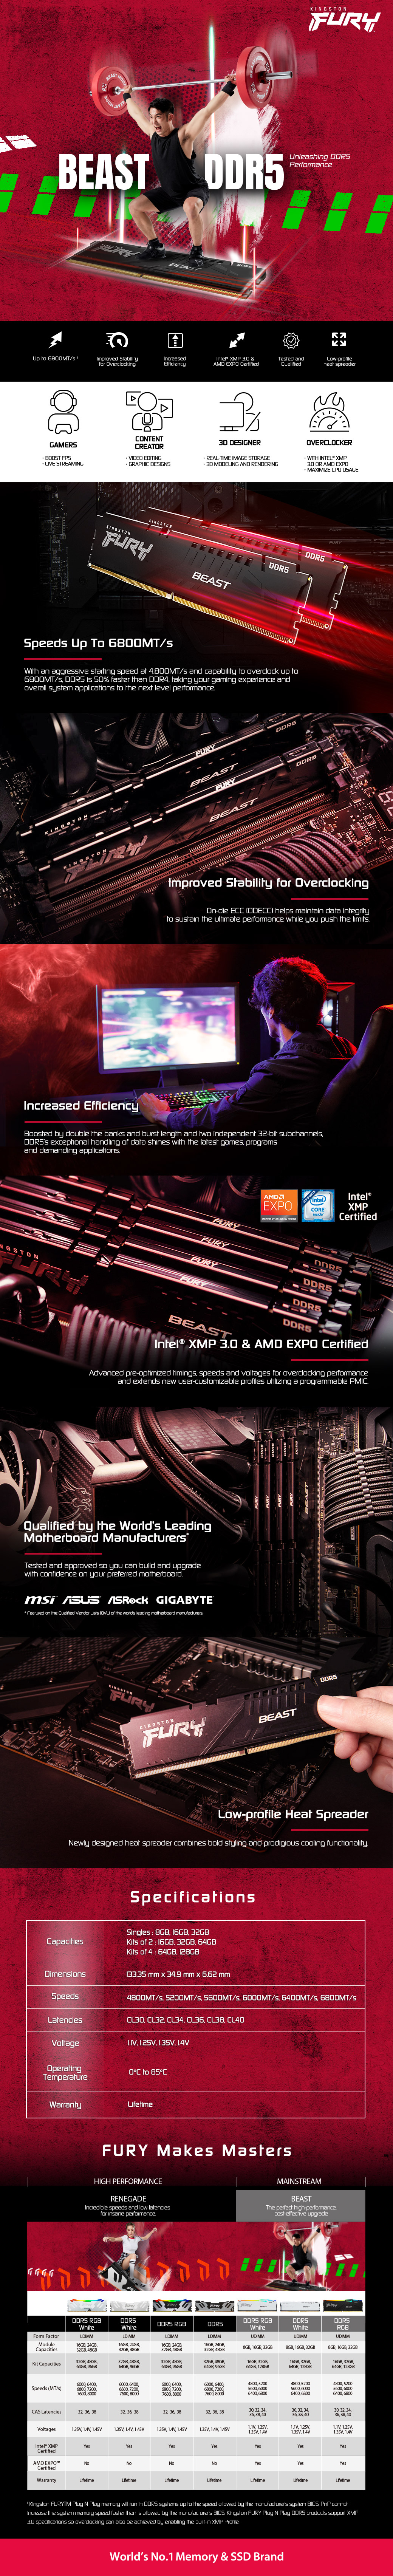 A large marketing image providing additional information about the product Kingston 64GB Kit (2x32GB) DDR5 Fury Beast EXPO/XMP CL30 6000MHz - Additional alt info not provided